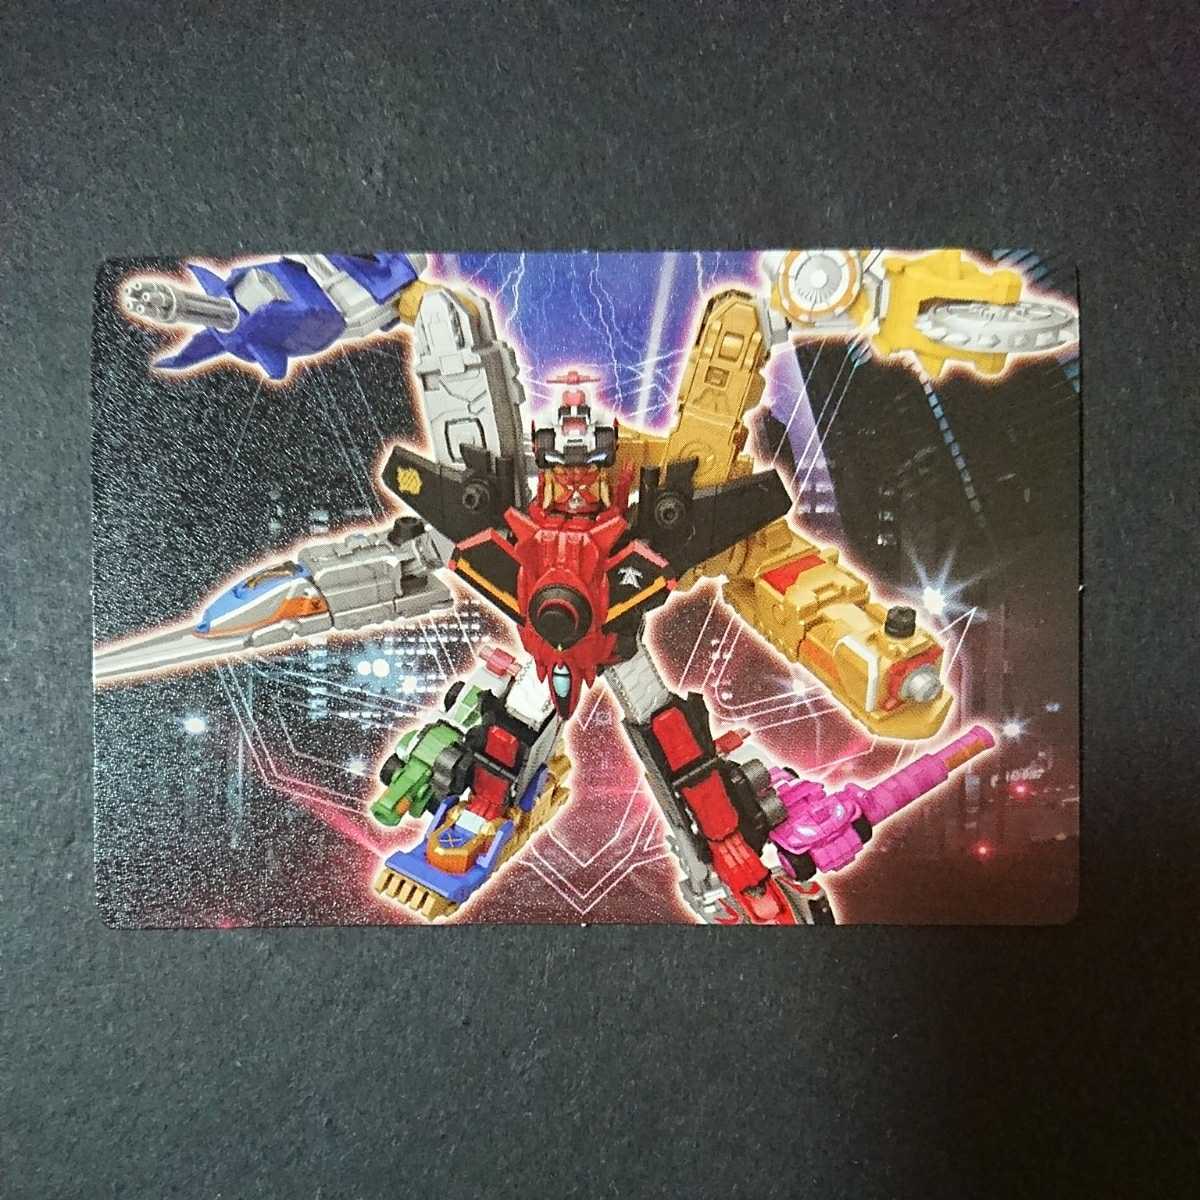  out of print card [gtokru Kaiser VSX(.. Squadron Lupin Ranger VS police Squadron pato Ranger card chewing gum )] super Squadron Series valuable card 